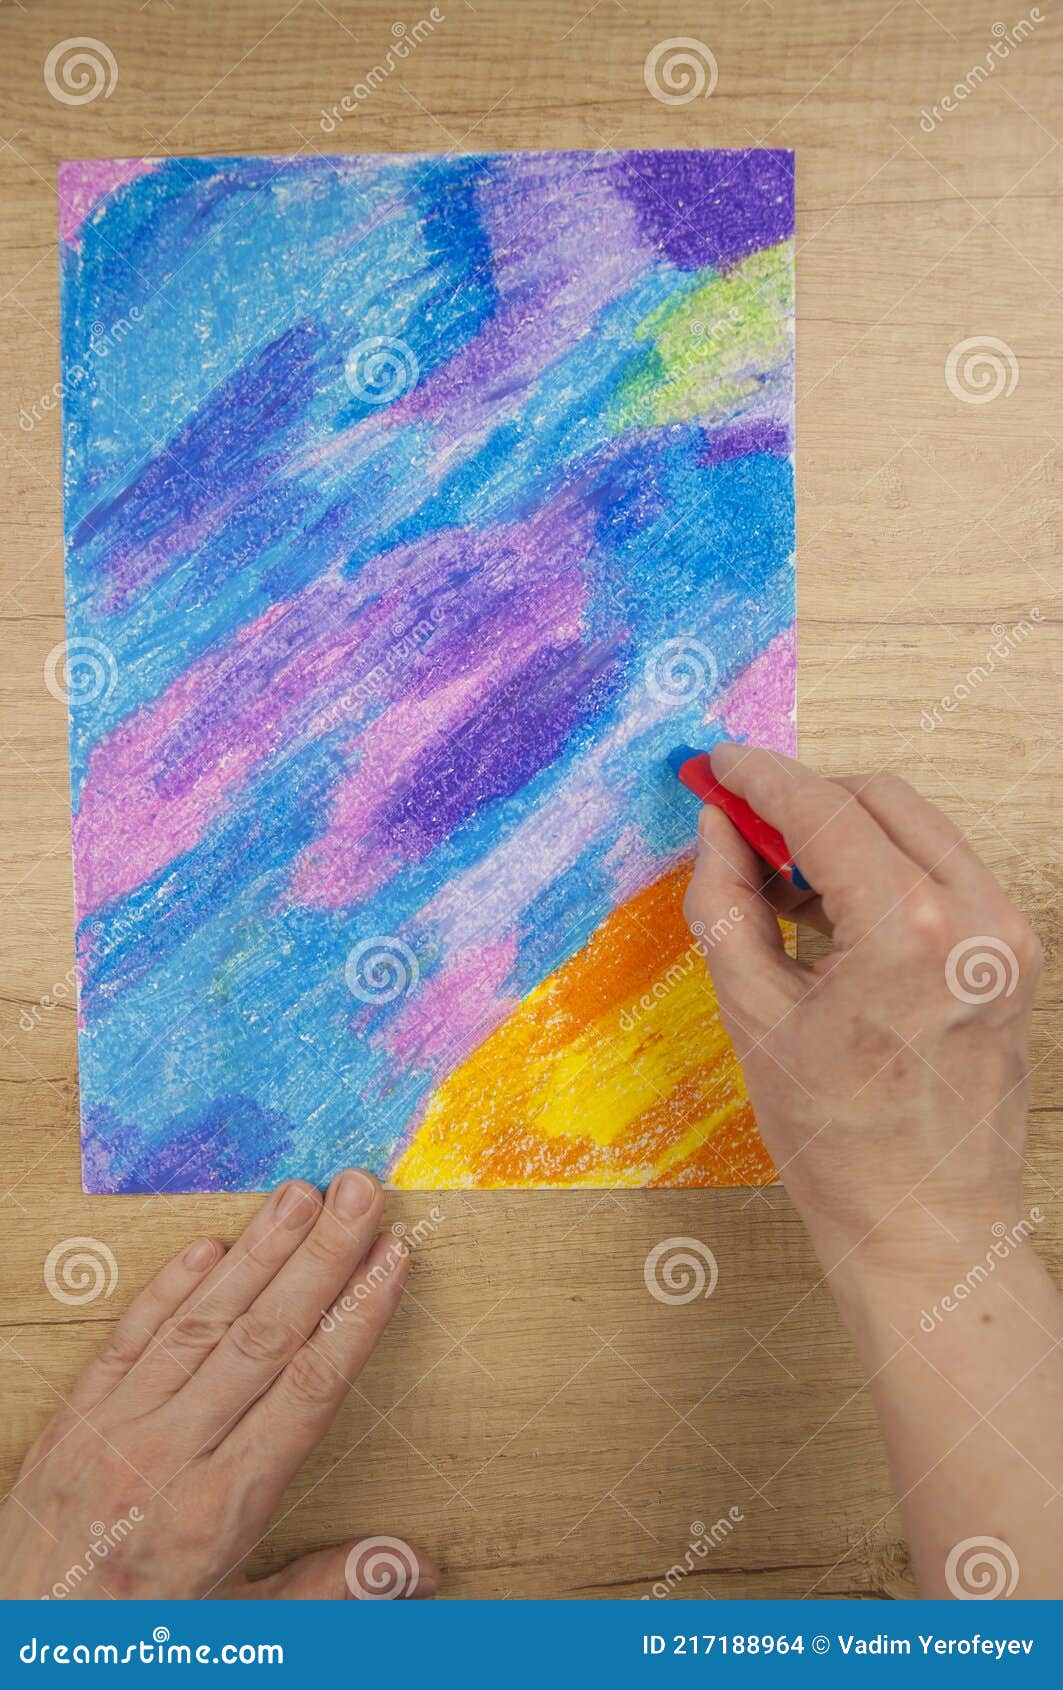 Paper For Oil Pastels: Over 16,217 Royalty-Free Licensable Stock Photos